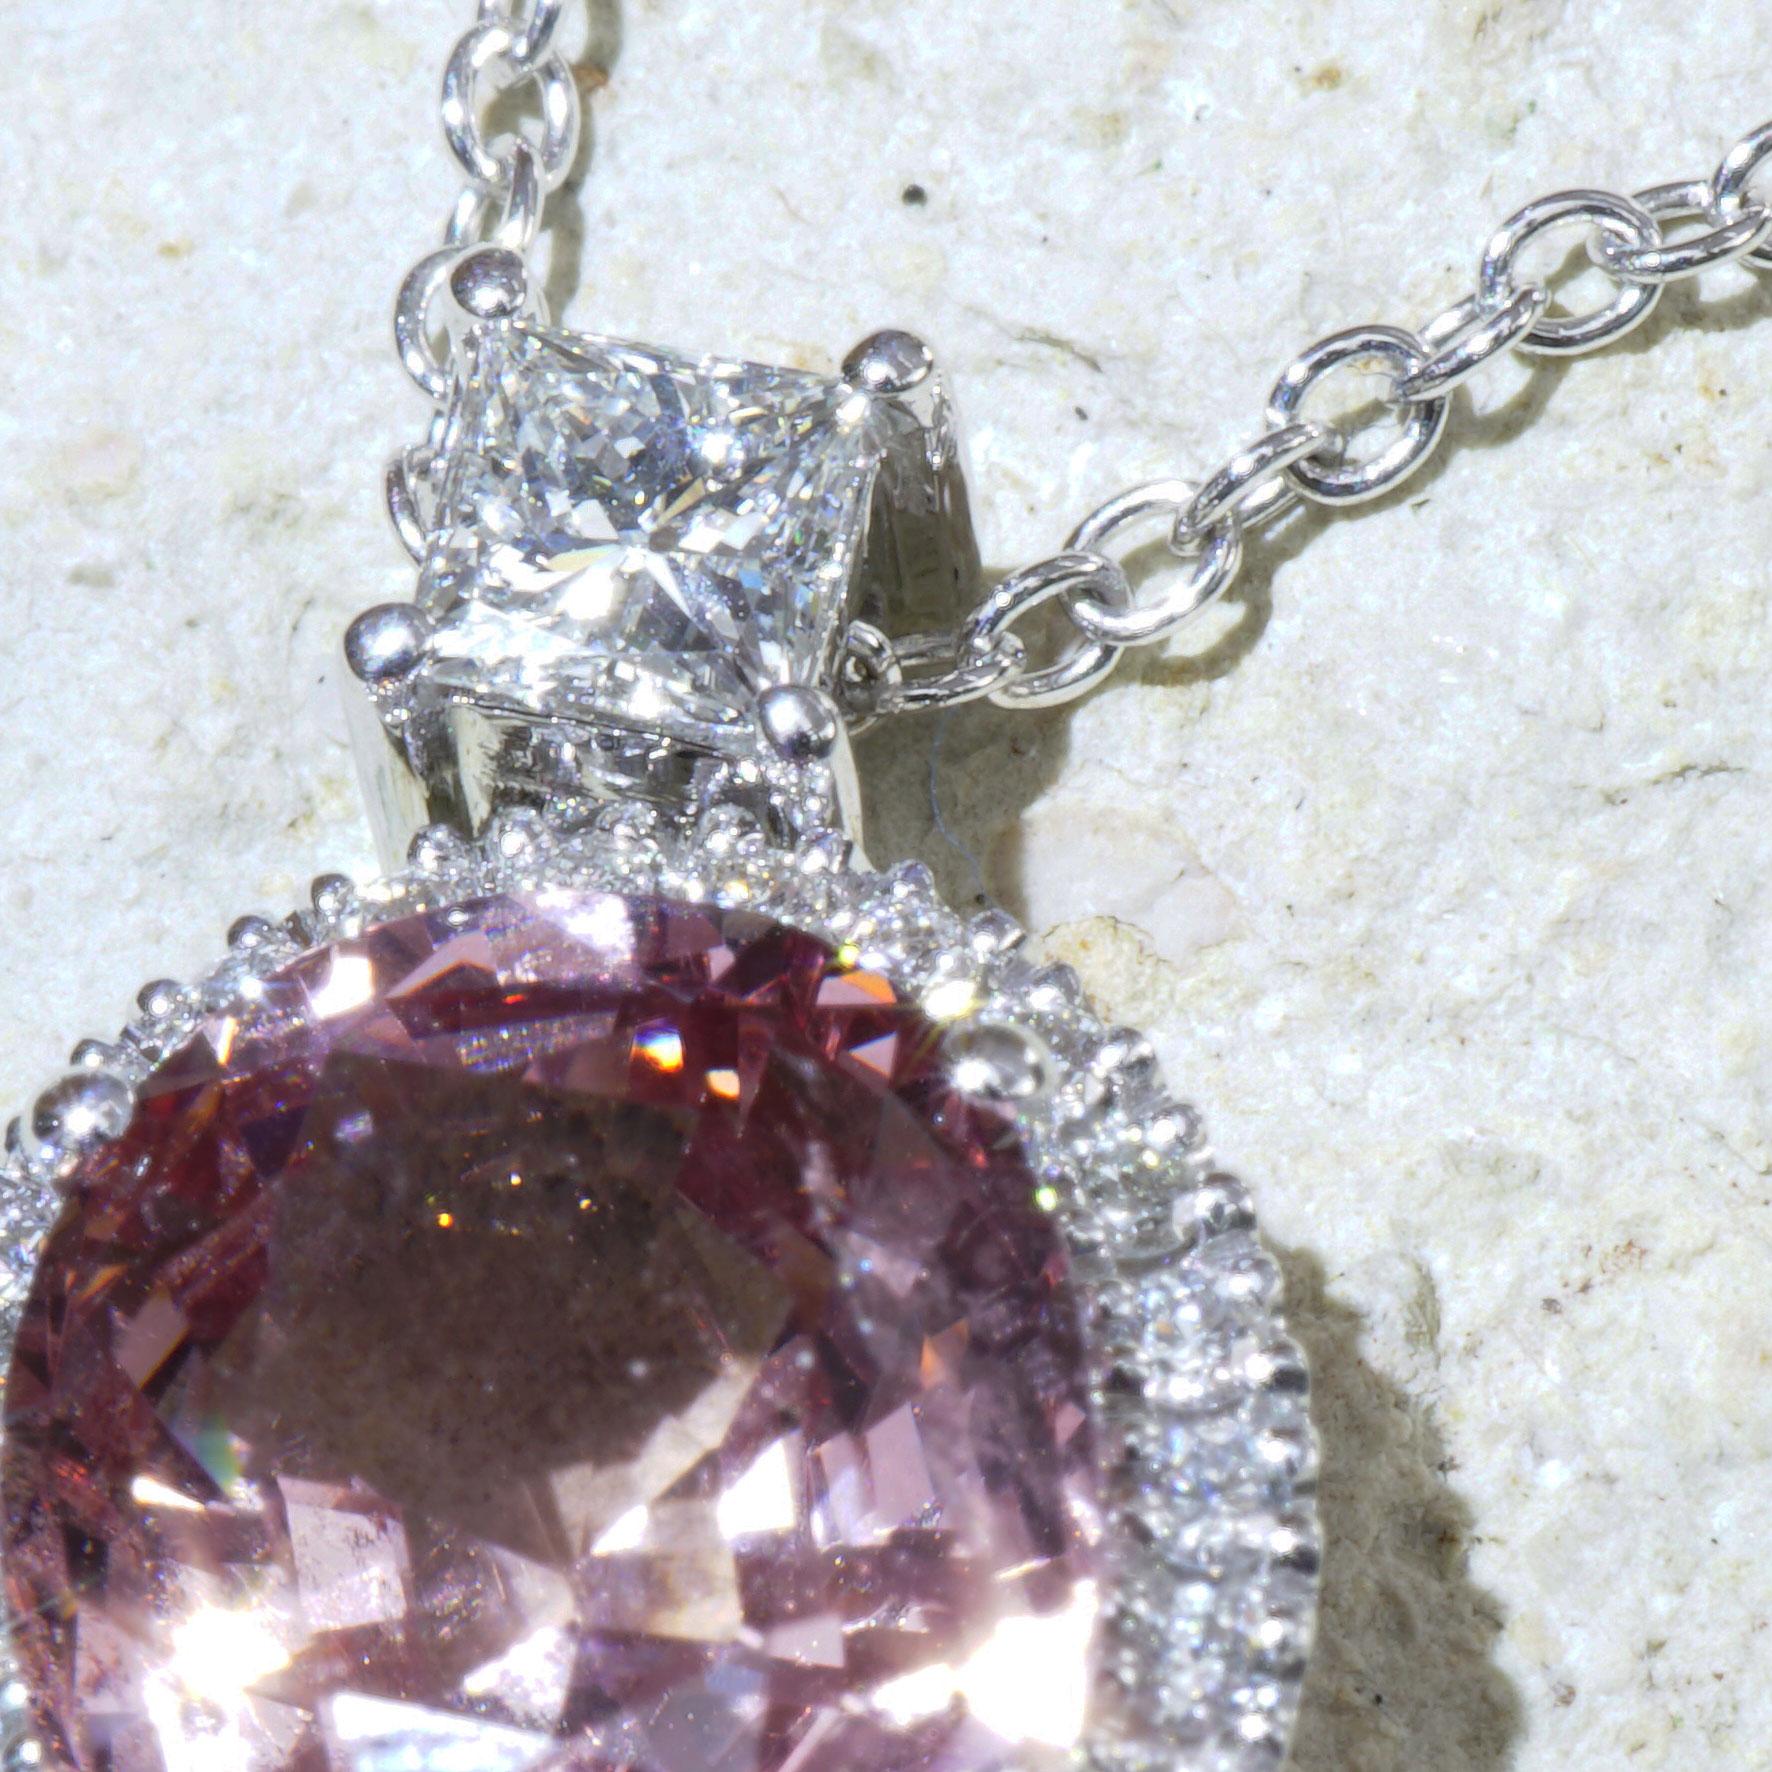 spinels are the stars of tomorrow, the refraction and brilliance is unbelievably beautiful, here we have a 3.46 ct pinkish-l. orange untreated spinel with GFCO expertise / Thailand, AAA+, eye clean, 10.13 x 8.24 x 5.40 mm, the pendant was made in a